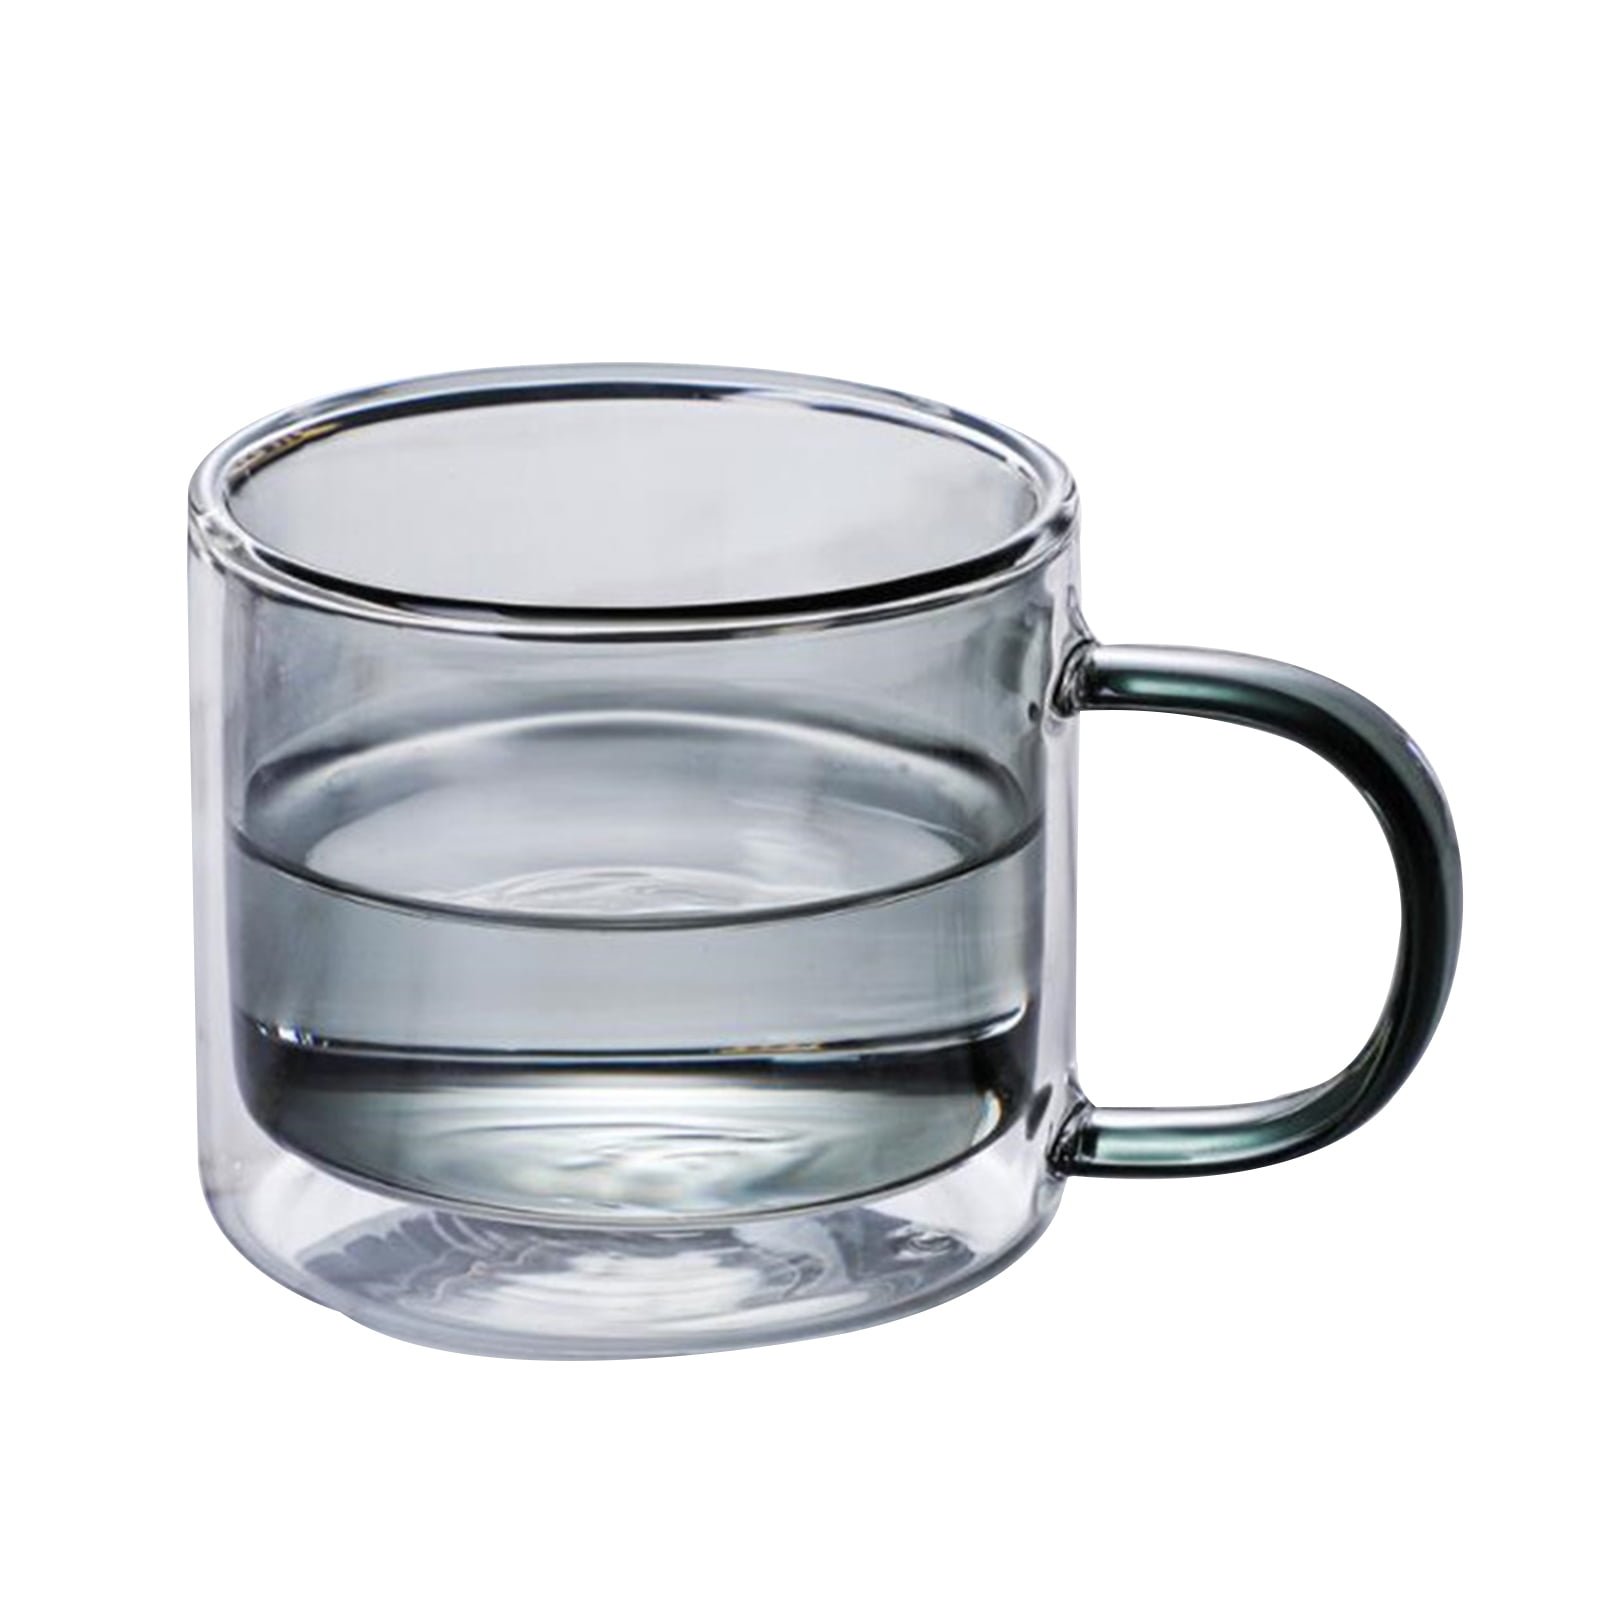 Pretty Comy Transparent Cylindrical Double Glass Coffee Cup 250mlClear Coffee Tea Glass Mugs, Size: 8.5, Green